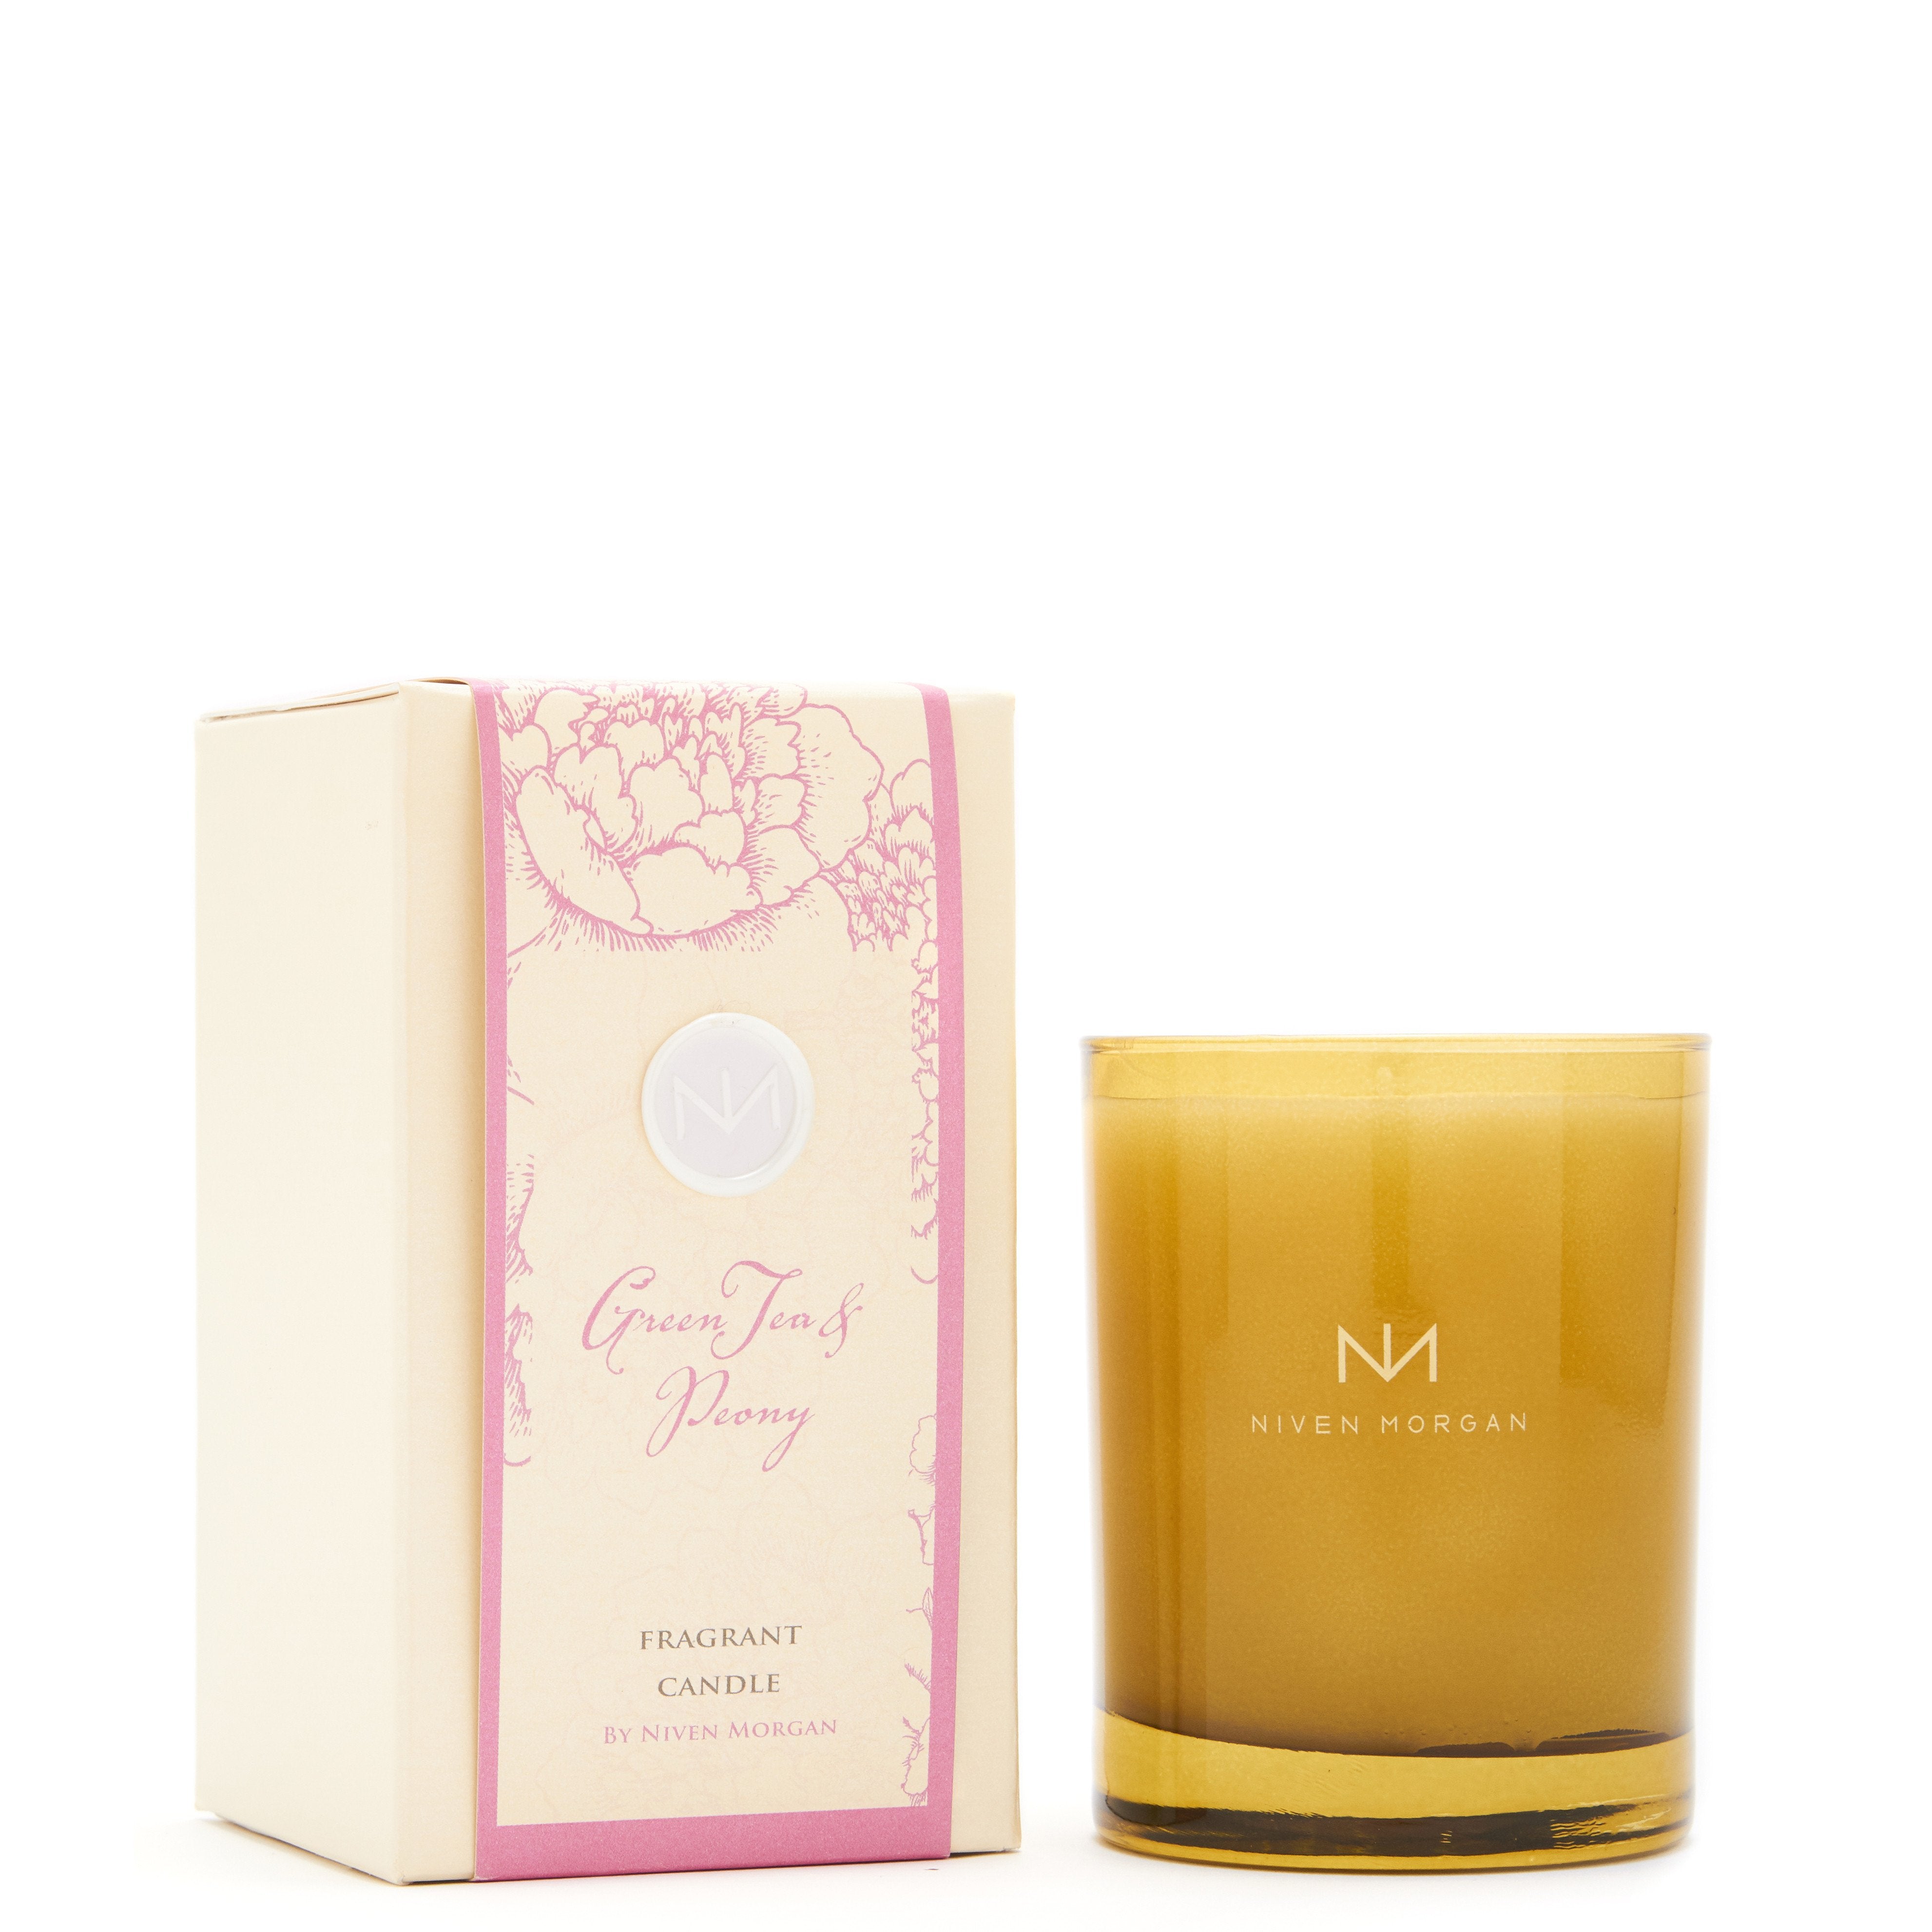 Green Tea & Peony Boxed Candle